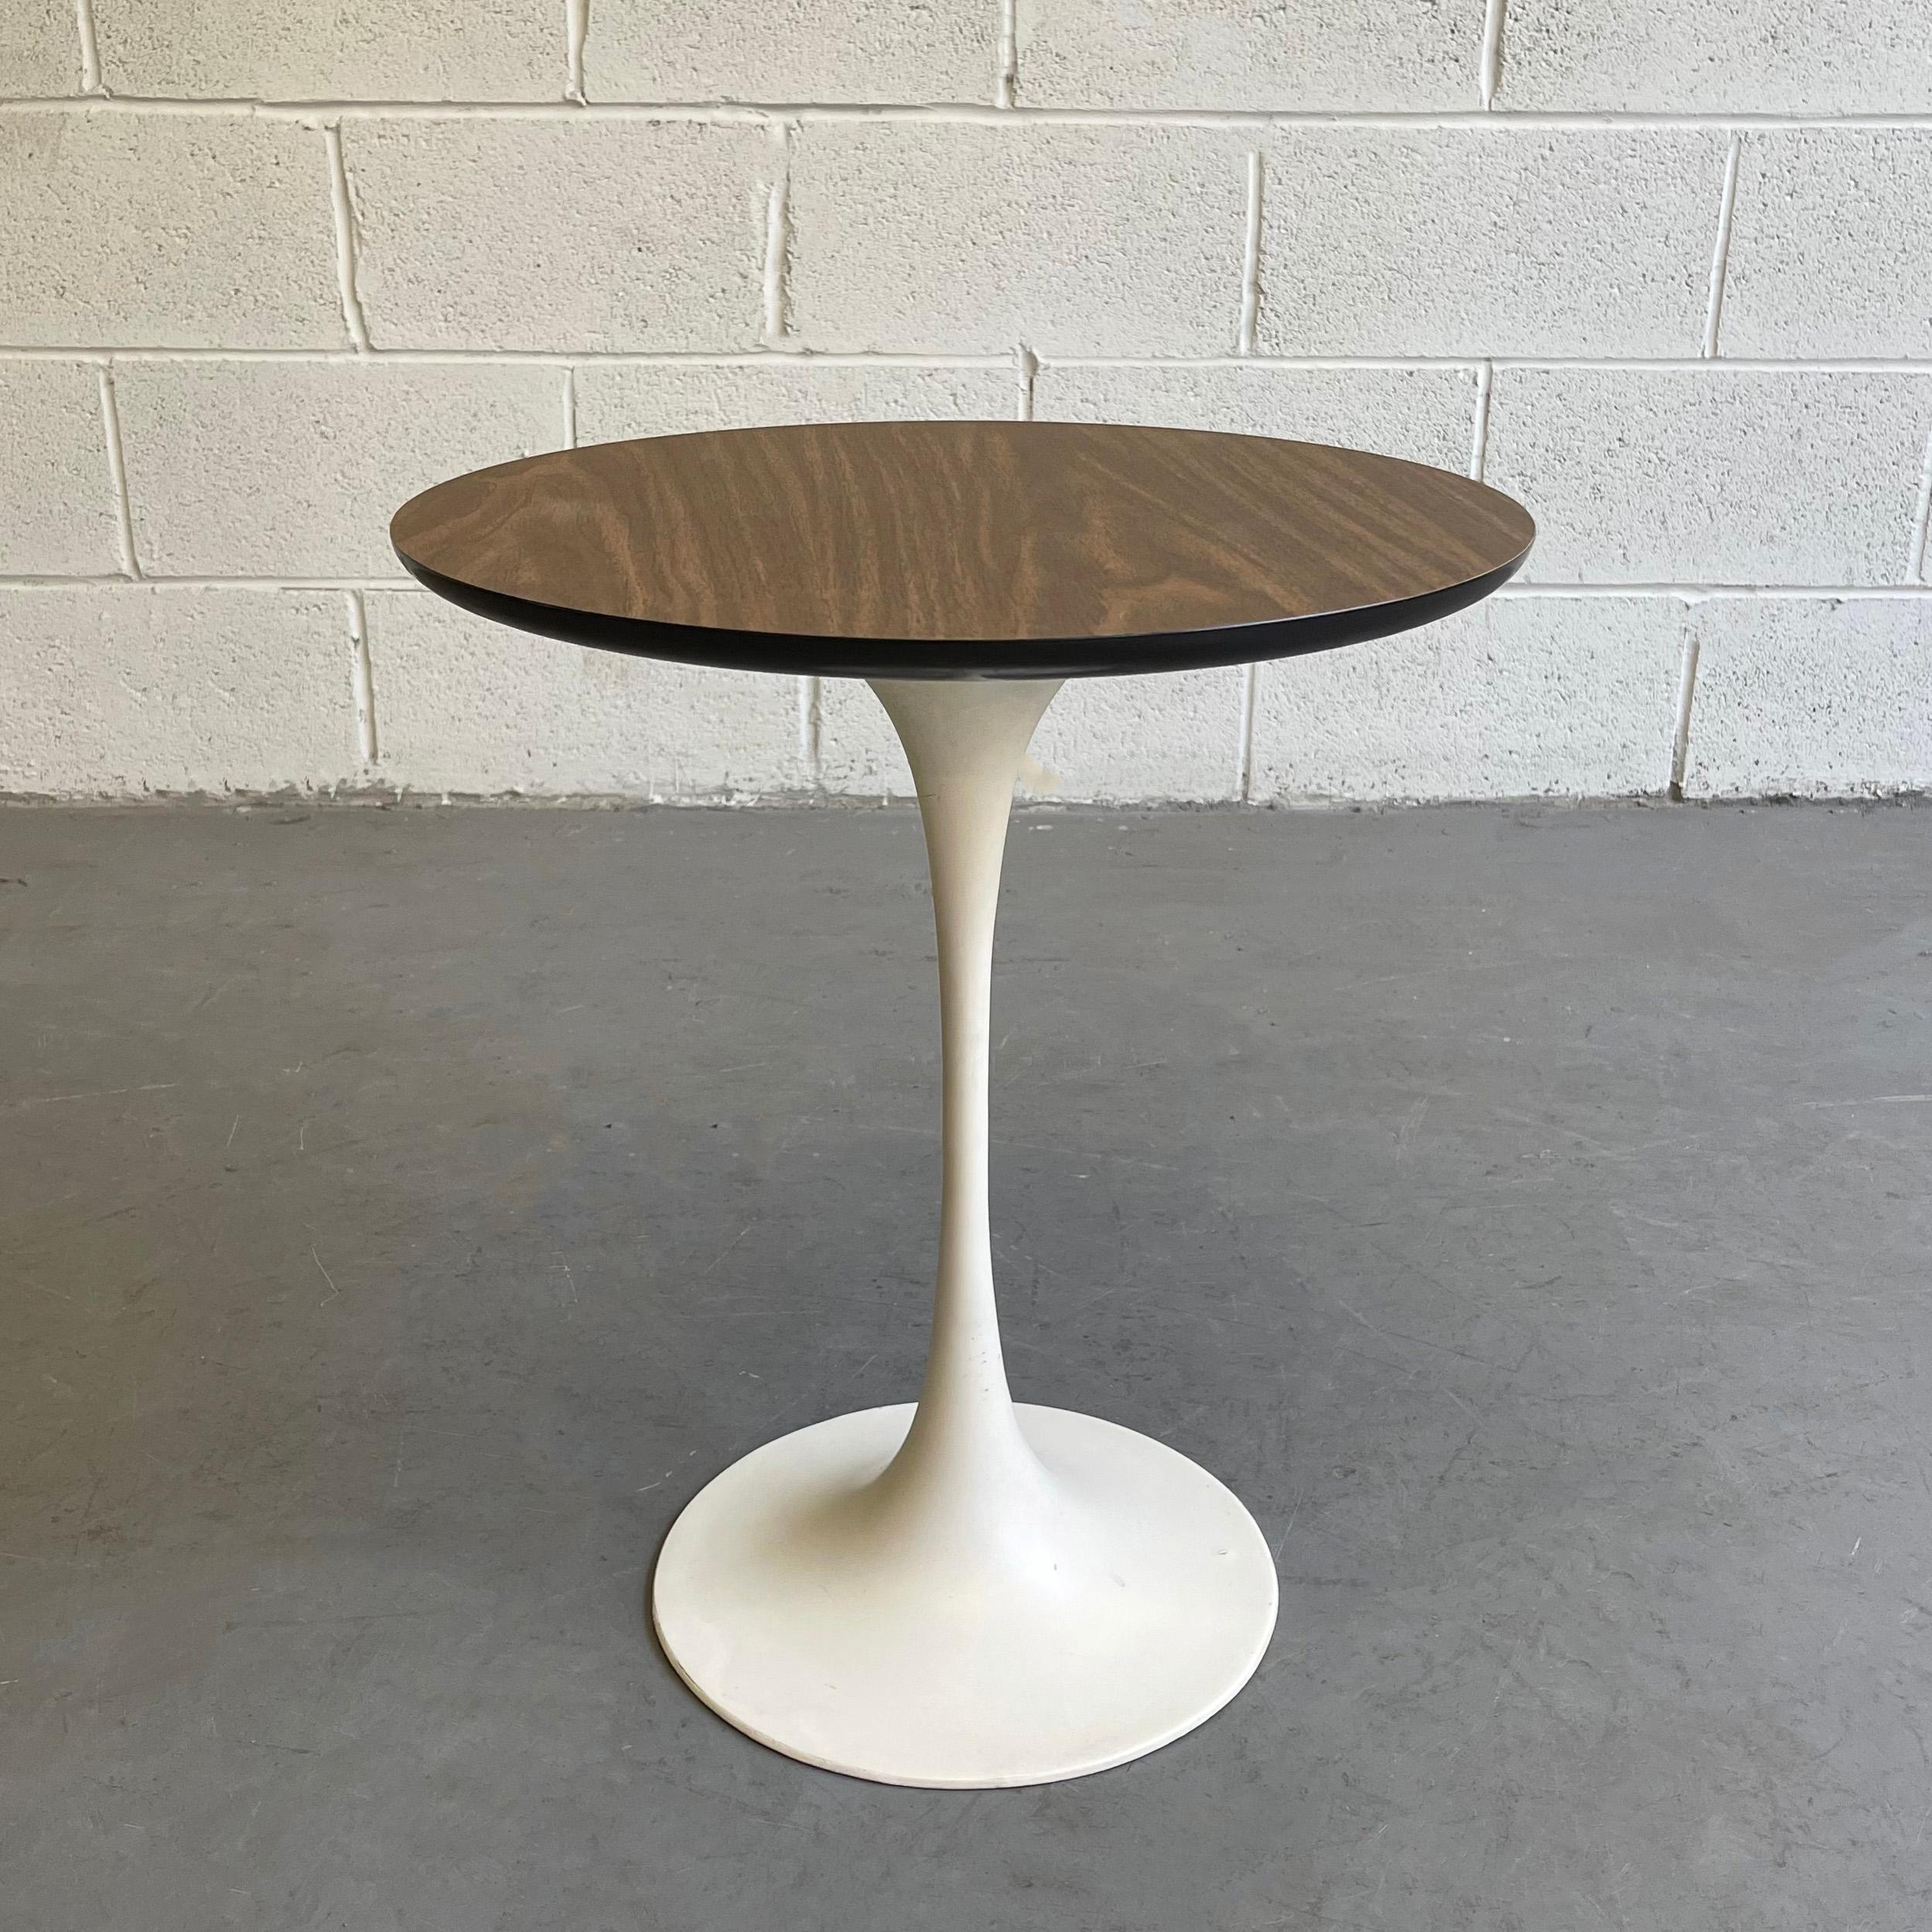 Mid-Century Modern, side table by Eero Saarinen for Knoll features a painted metal tulip pedestal base with laminate wood top.